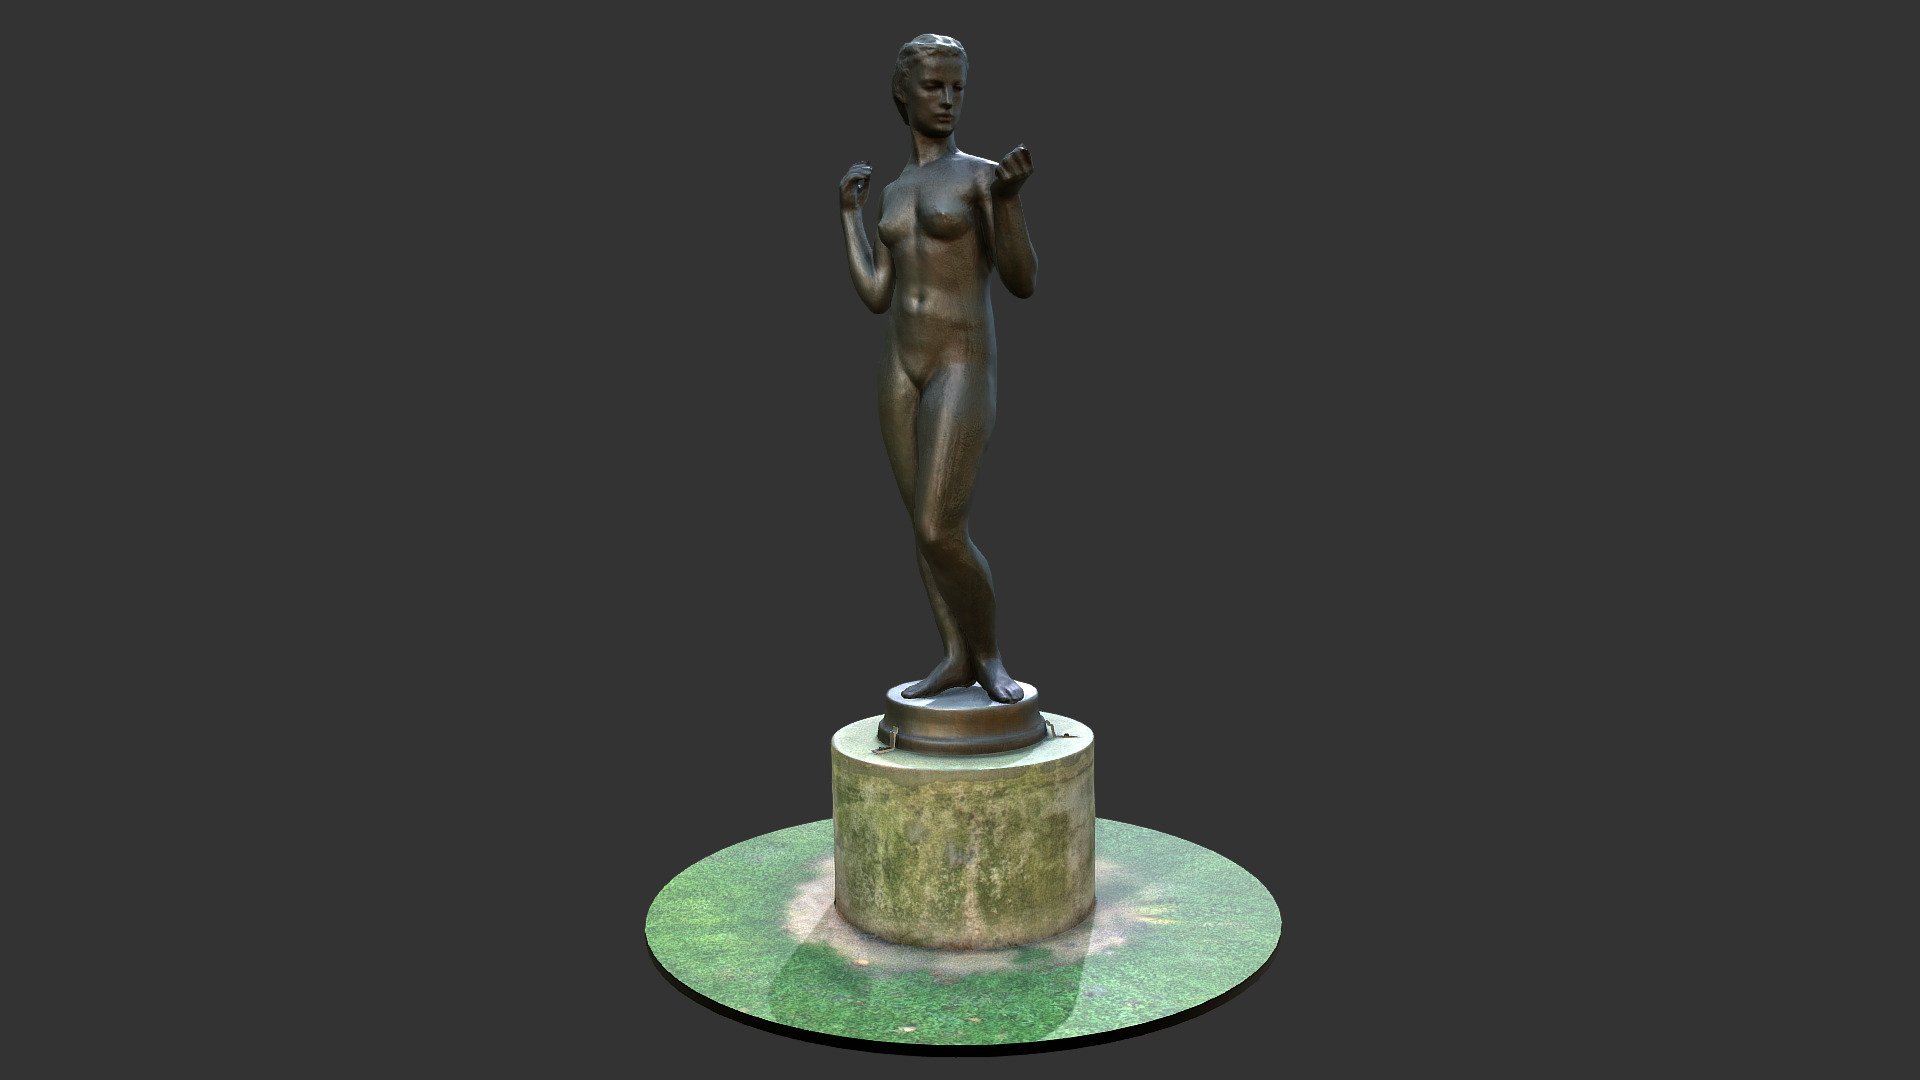 Rolande by Robert Wlérick (1882-1944)

The real statue is on display at the Parc Albert Michallon (Garden Michallon) of the museum of Grenoble (France) - Bronze woman statue - 3D model by Ivan DINH (@ivandinh) 3d model